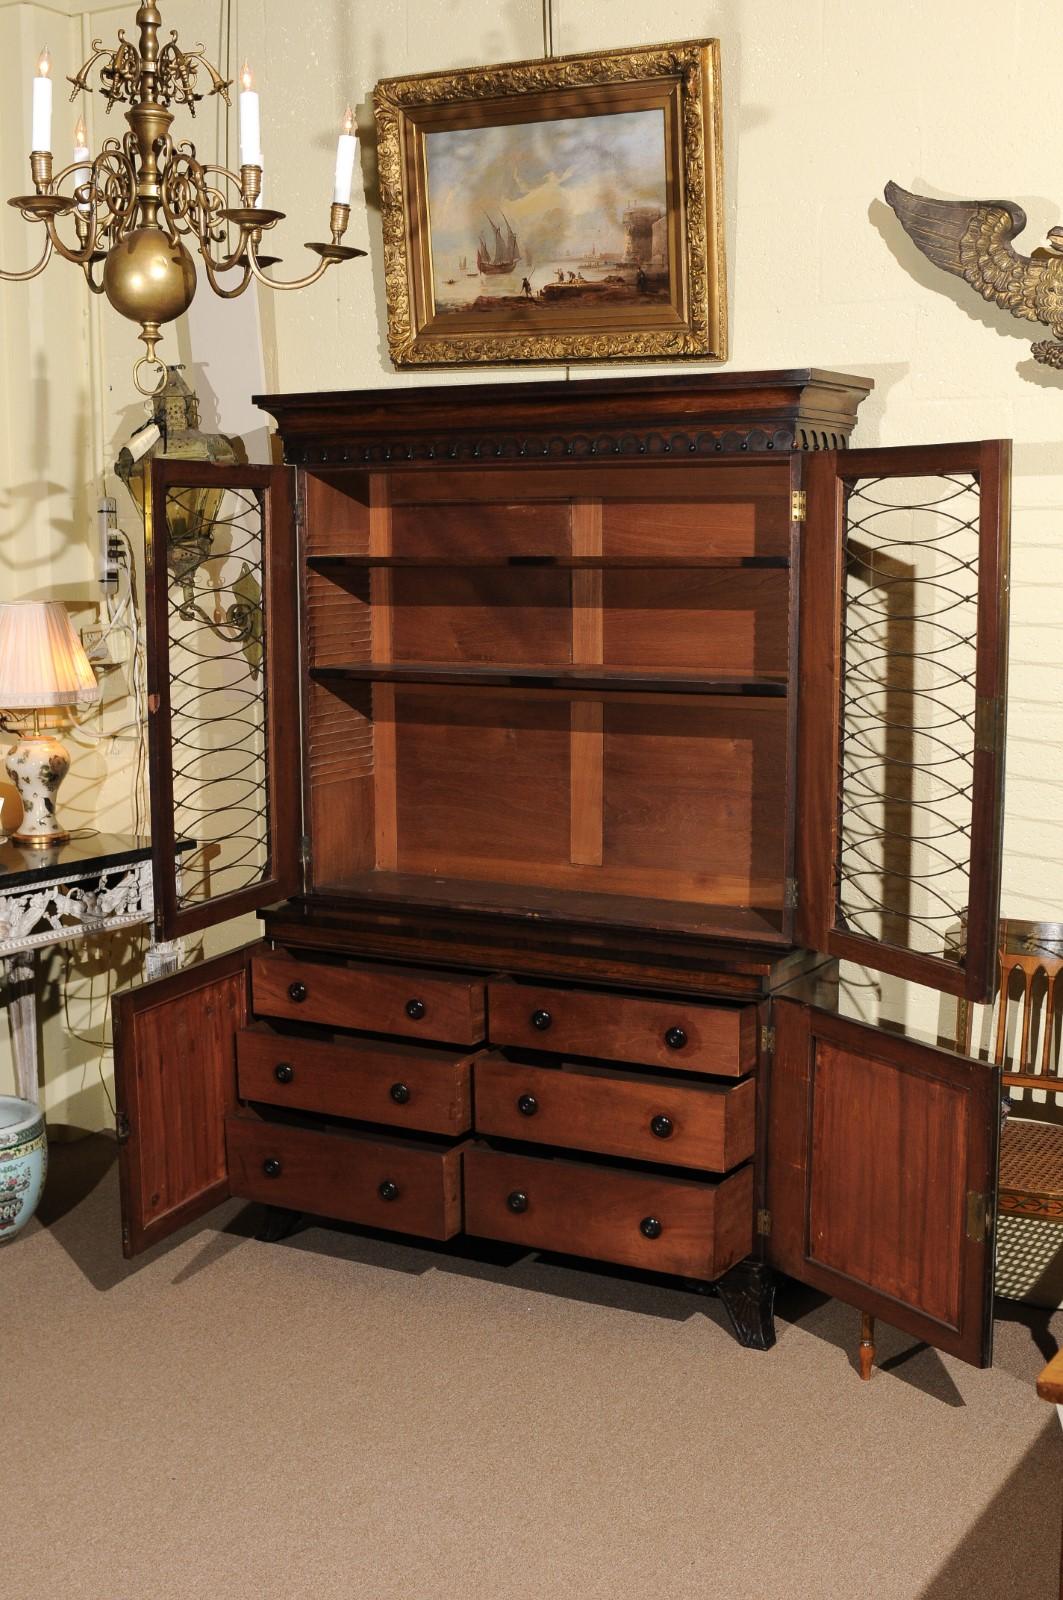 19th Century English Regency Style Rosewood Bookcase/Cabinet with Gilt Accents For Sale 2